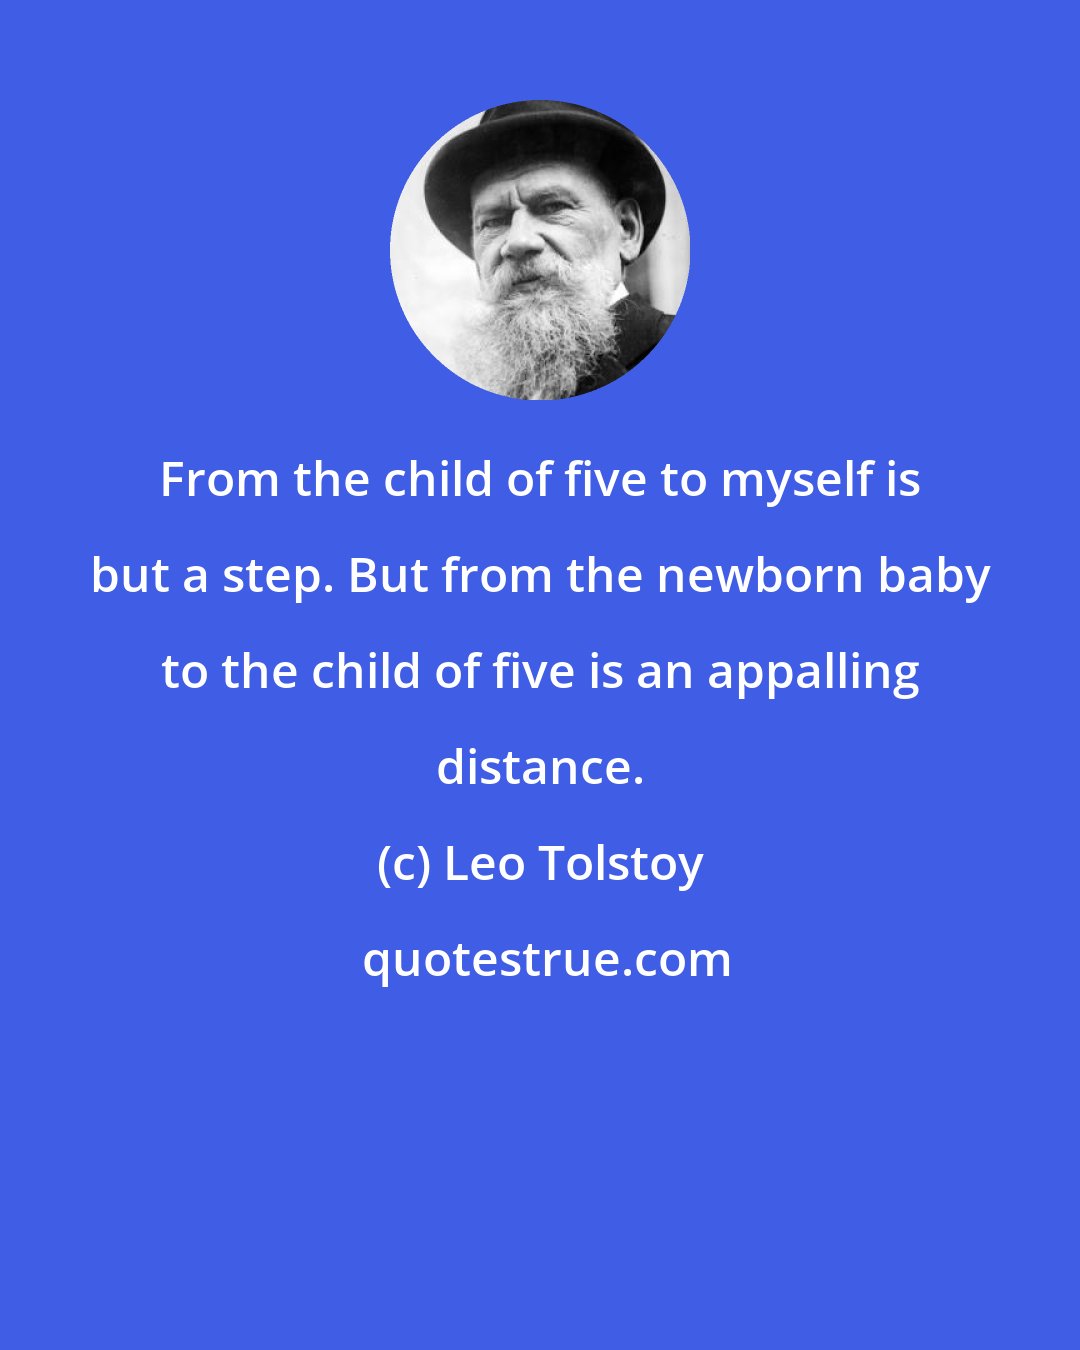 Leo Tolstoy: From the child of five to myself is but a step. But from the newborn baby to the child of five is an appalling distance.